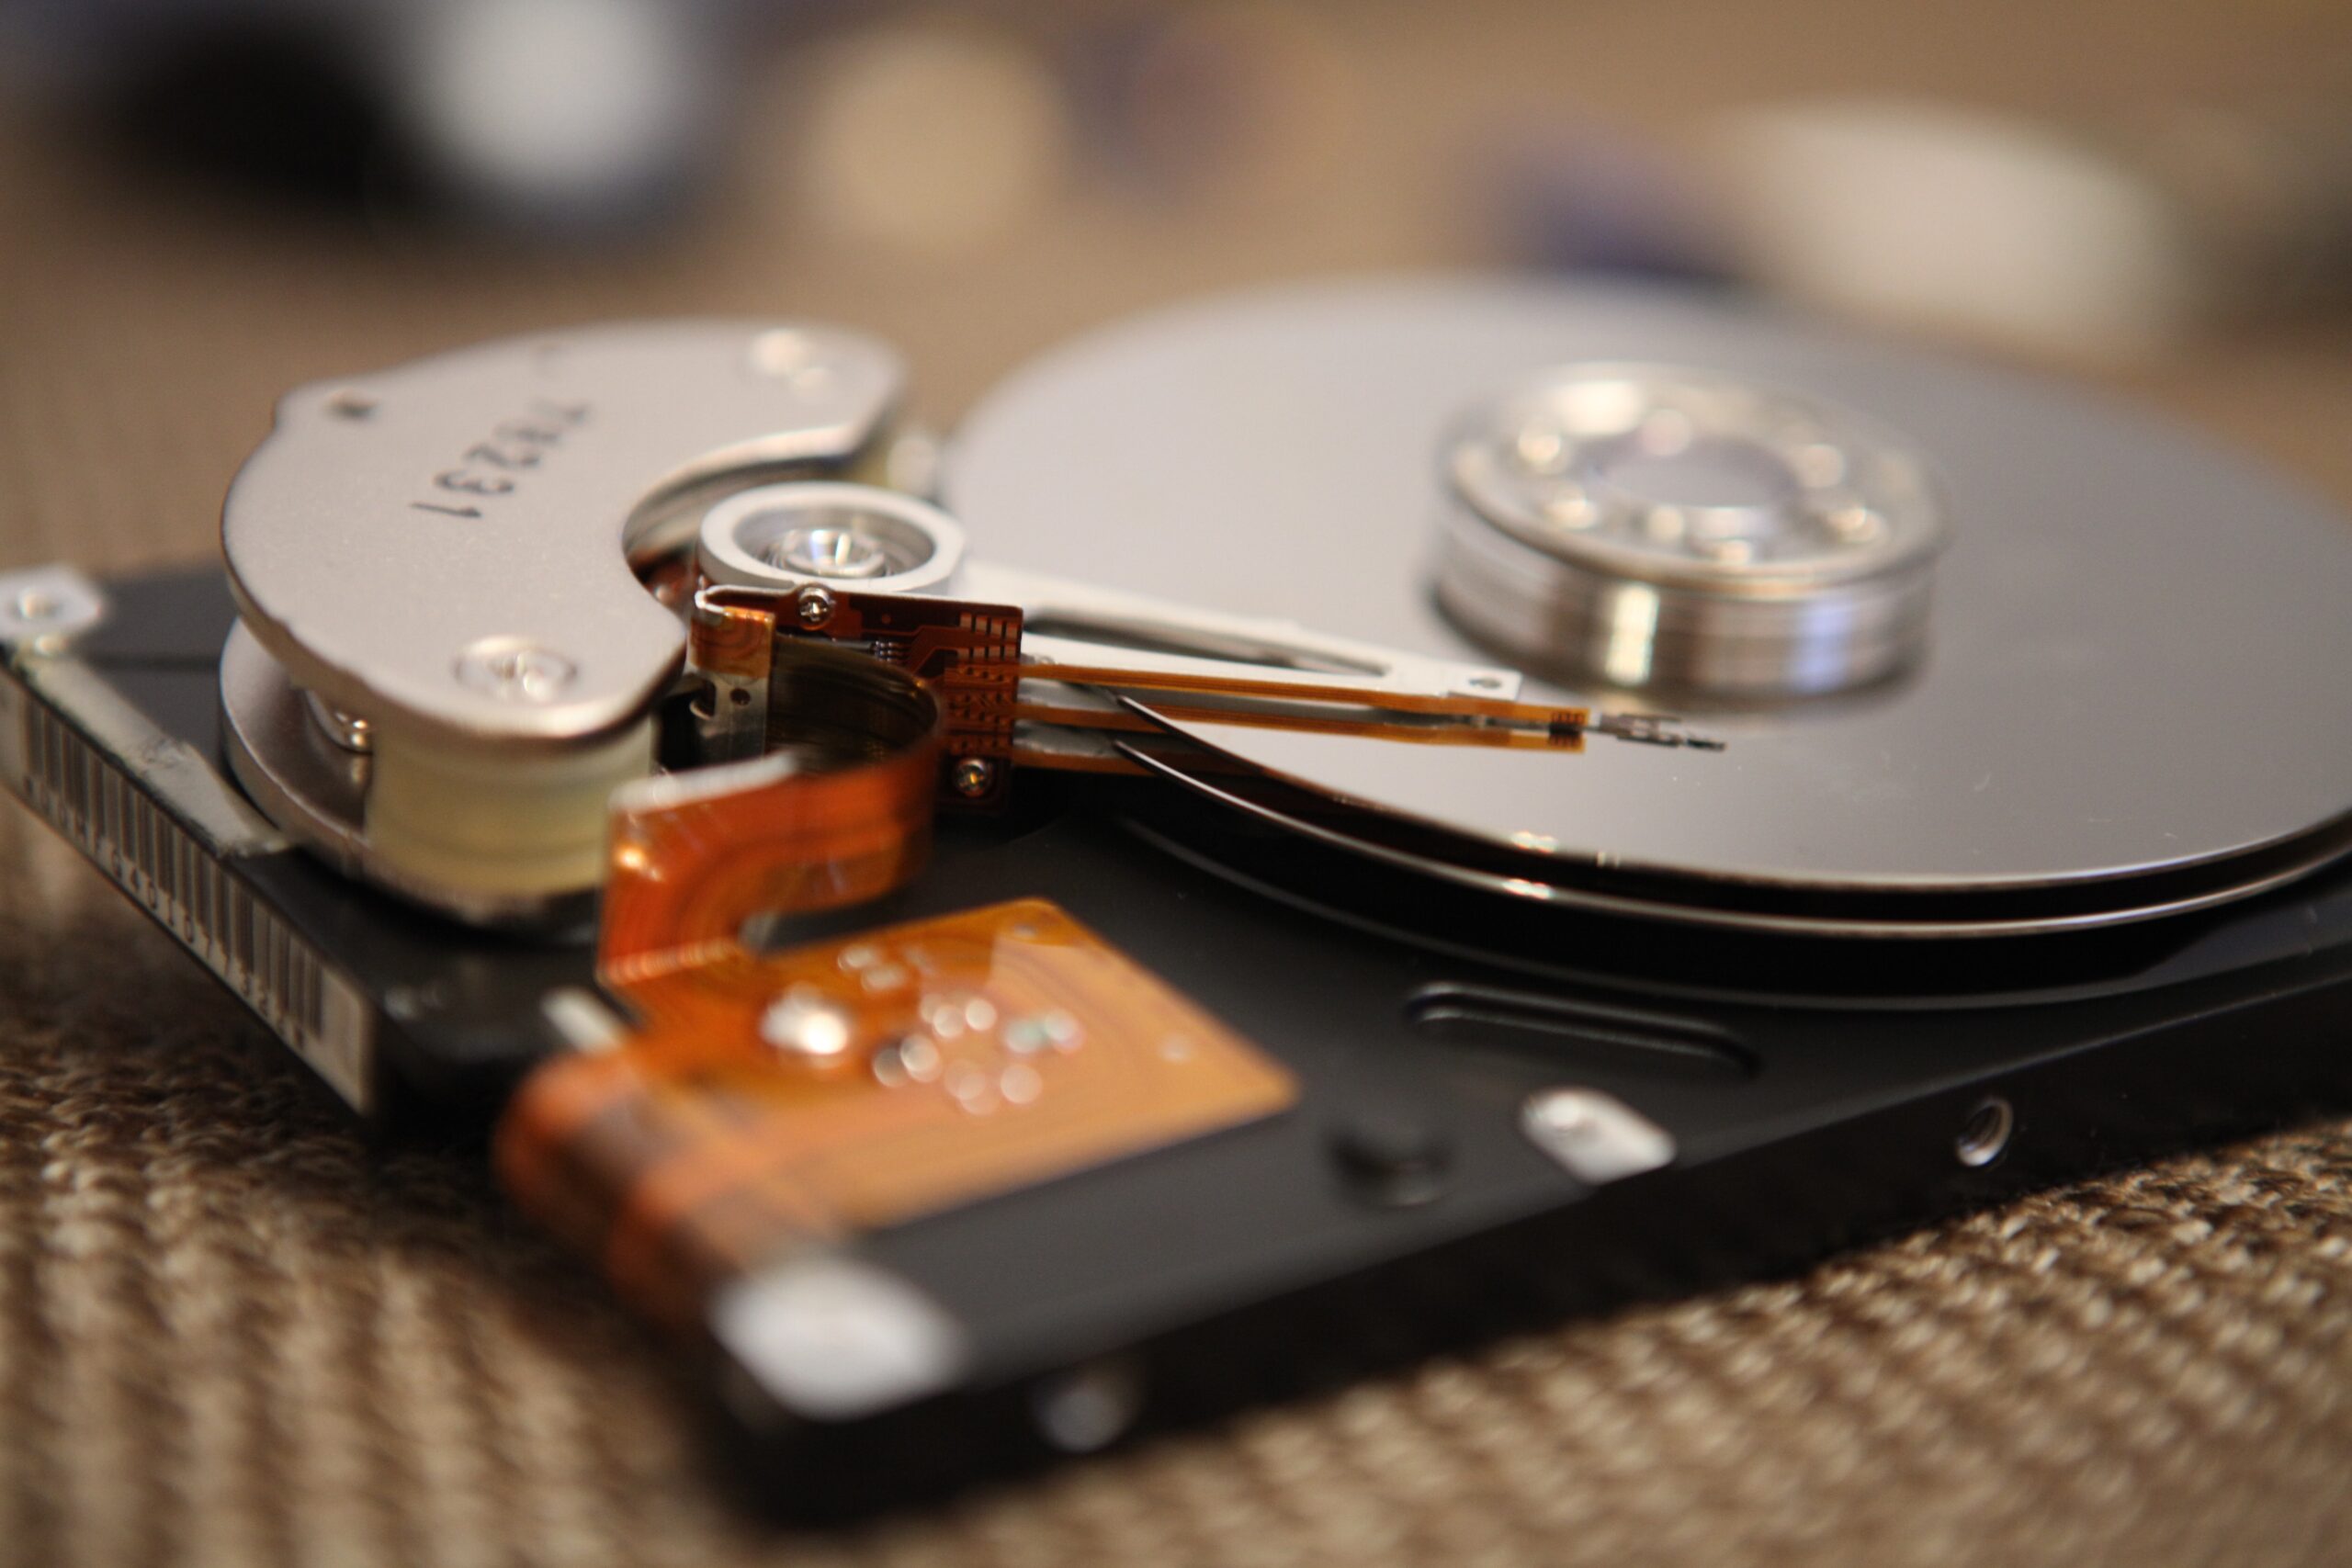 data recovery, file recovery, photo recovery, lc tech, rescuepro, sandisk, video recovery, software, get files back, deleted photos, photorecovery, videorecovery, filerecovery, hard drive failure, solid state doctor